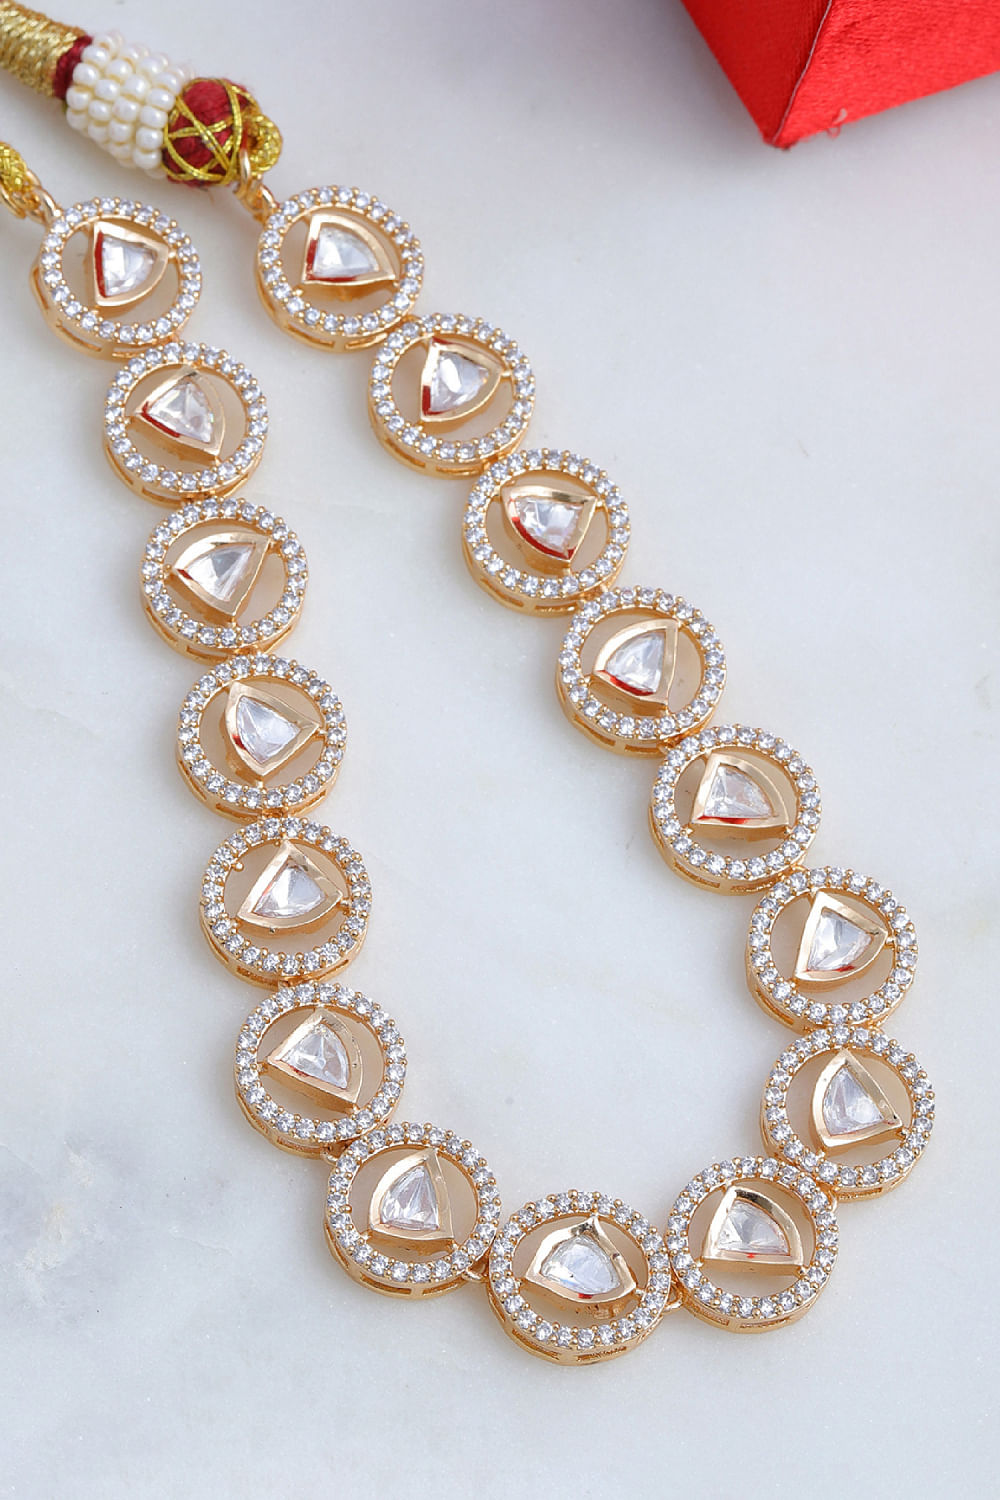 Buy Gold diamond and kundan necklace by Ruby Raang at Aashni and Co